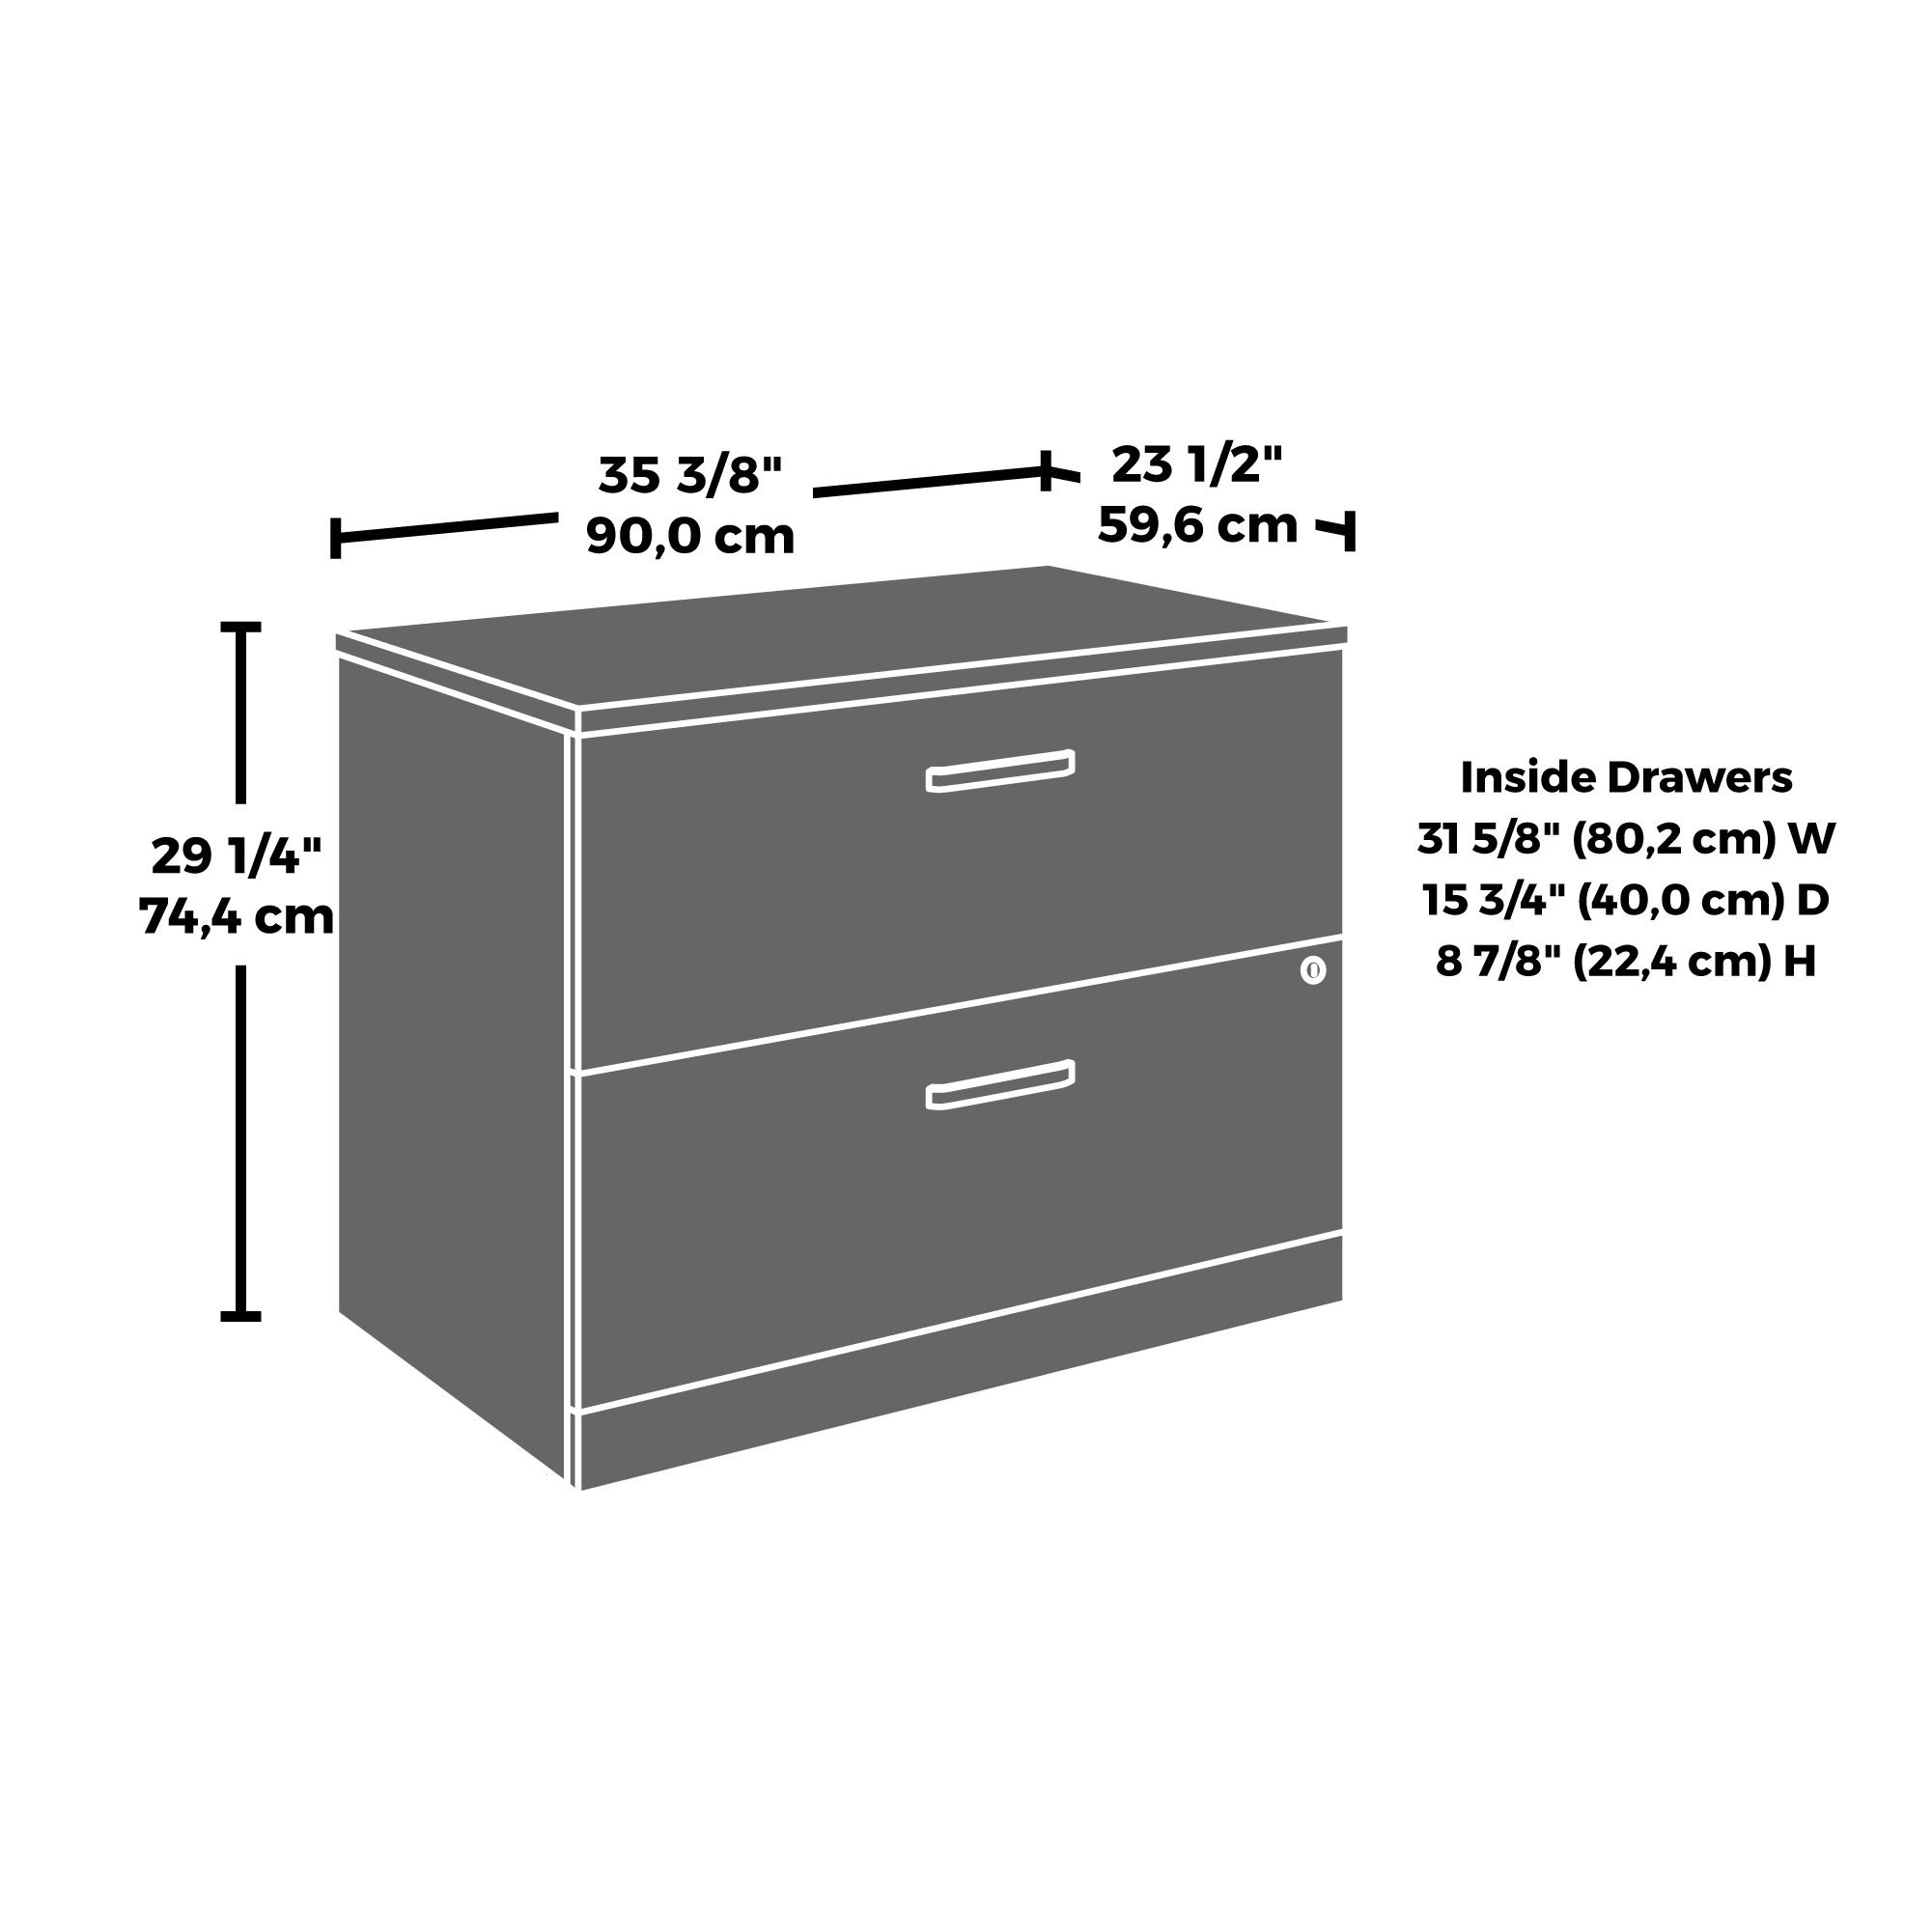 Sauder Affirm™ Commercial 72"x36" Executive Bowfront Desk with Lateral File Cabinet, Classic Cherry® finish (# 430225)